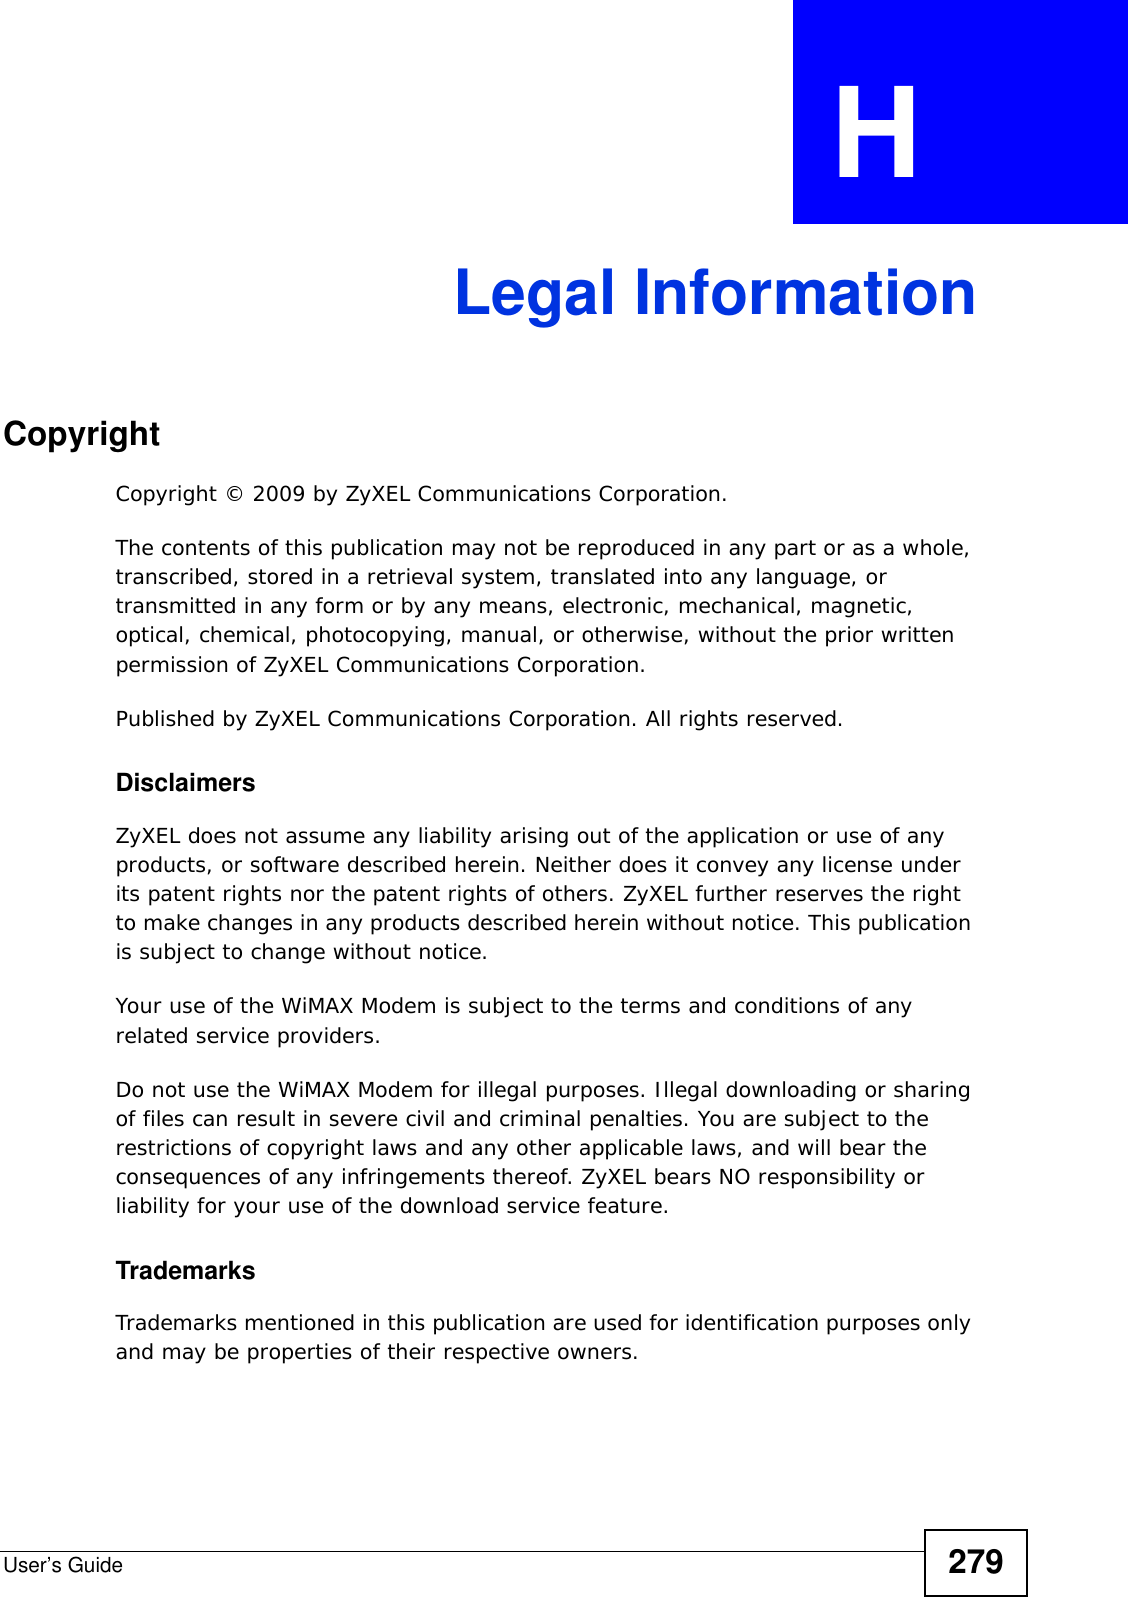 User’s Guide 279APPENDIX  H Legal InformationCopyrightCopyright © 2009 by ZyXEL Communications Corporation.The contents of this publication may not be reproduced in any part or as a whole, transcribed, stored in a retrieval system, translated into any language, or transmitted in any form or by any means, electronic, mechanical, magnetic, optical, chemical, photocopying, manual, or otherwise, without the prior written permission of ZyXEL Communications Corporation.Published by ZyXEL Communications Corporation. All rights reserved.DisclaimersZyXEL does not assume any liability arising out of the application or use of any products, or software described herein. Neither does it convey any license under its patent rights nor the patent rights of others. ZyXEL further reserves the right to make changes in any products described herein without notice. This publication is subject to change without notice.Your use of the WiMAX Modem is subject to the terms and conditions of any related service providers.Do not use the WiMAX Modem for illegal purposes. Illegal downloading or sharing of files can result in severe civil and criminal penalties. You are subject to the restrictions of copyright laws and any other applicable laws, and will bear the consequences of any infringements thereof. ZyXEL bears NO responsibility or liability for your use of the download service feature.TrademarksTrademarks mentioned in this publication are used for identification purposes only and may be properties of their respective owners.